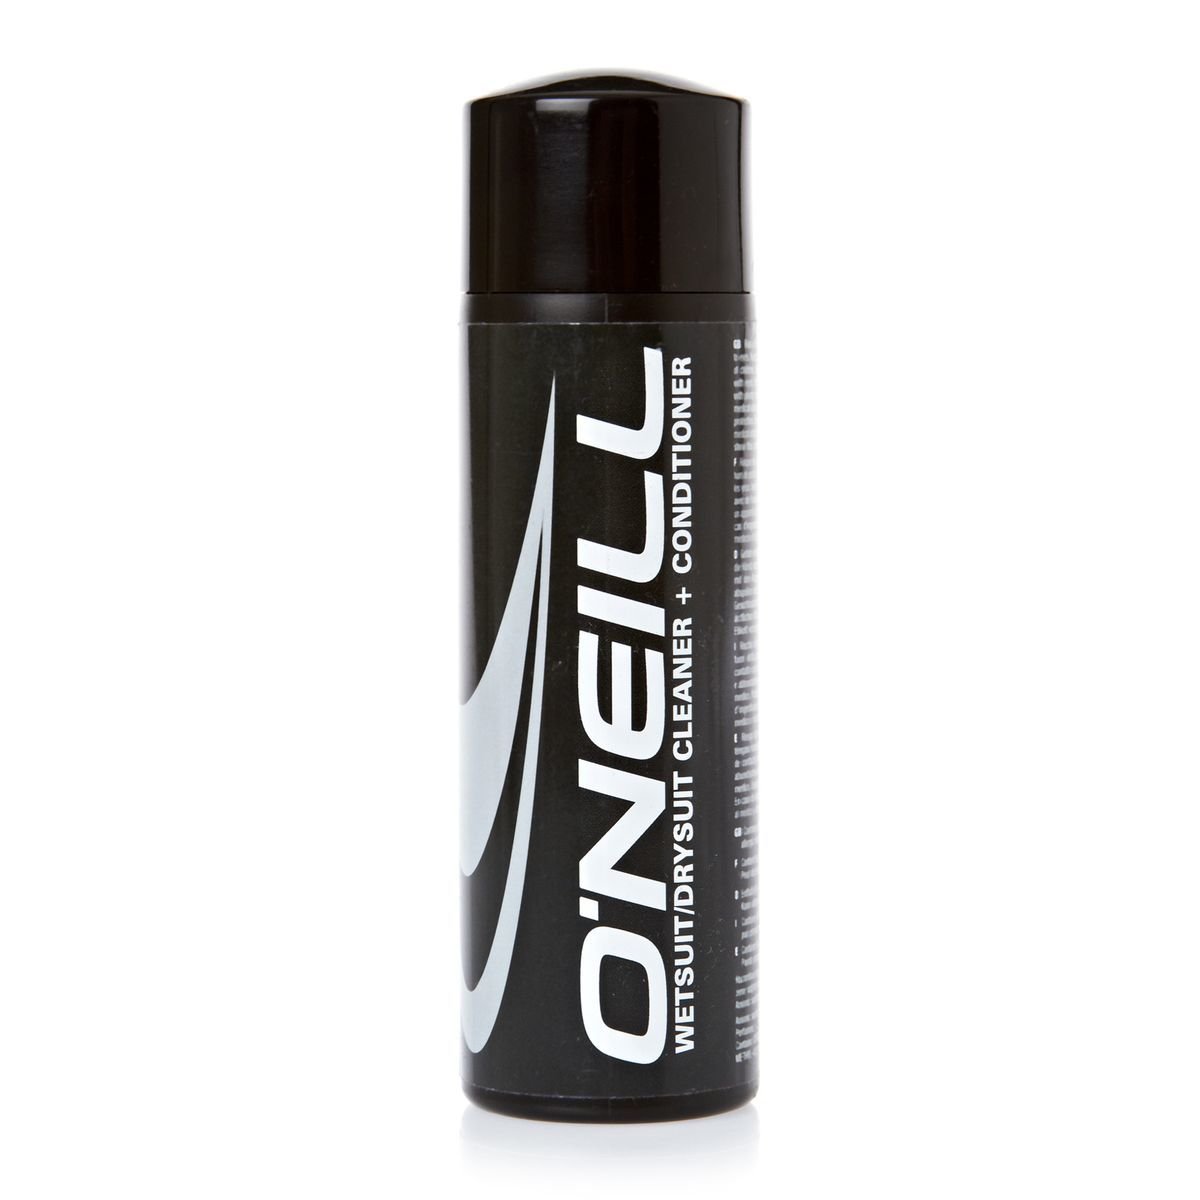 O’neill Wetsuit Cleaner